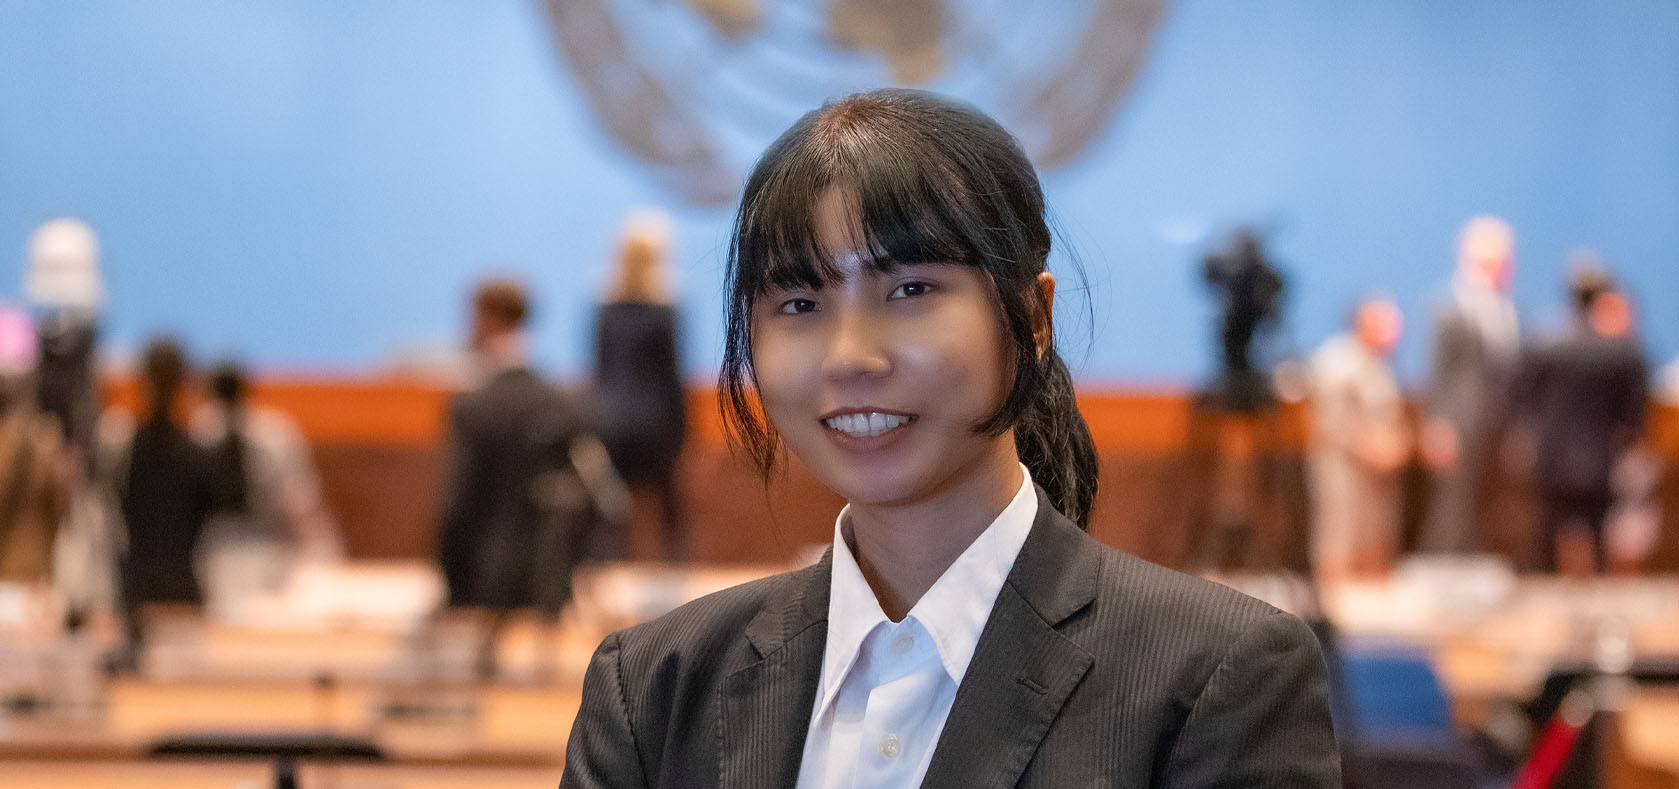 Asmanee Chesuemae poses at the United Nations Conference Centre in Bangkok during International Women’s Day celebrations on 8 March 2022. Photo: UN Women/Emad Karim